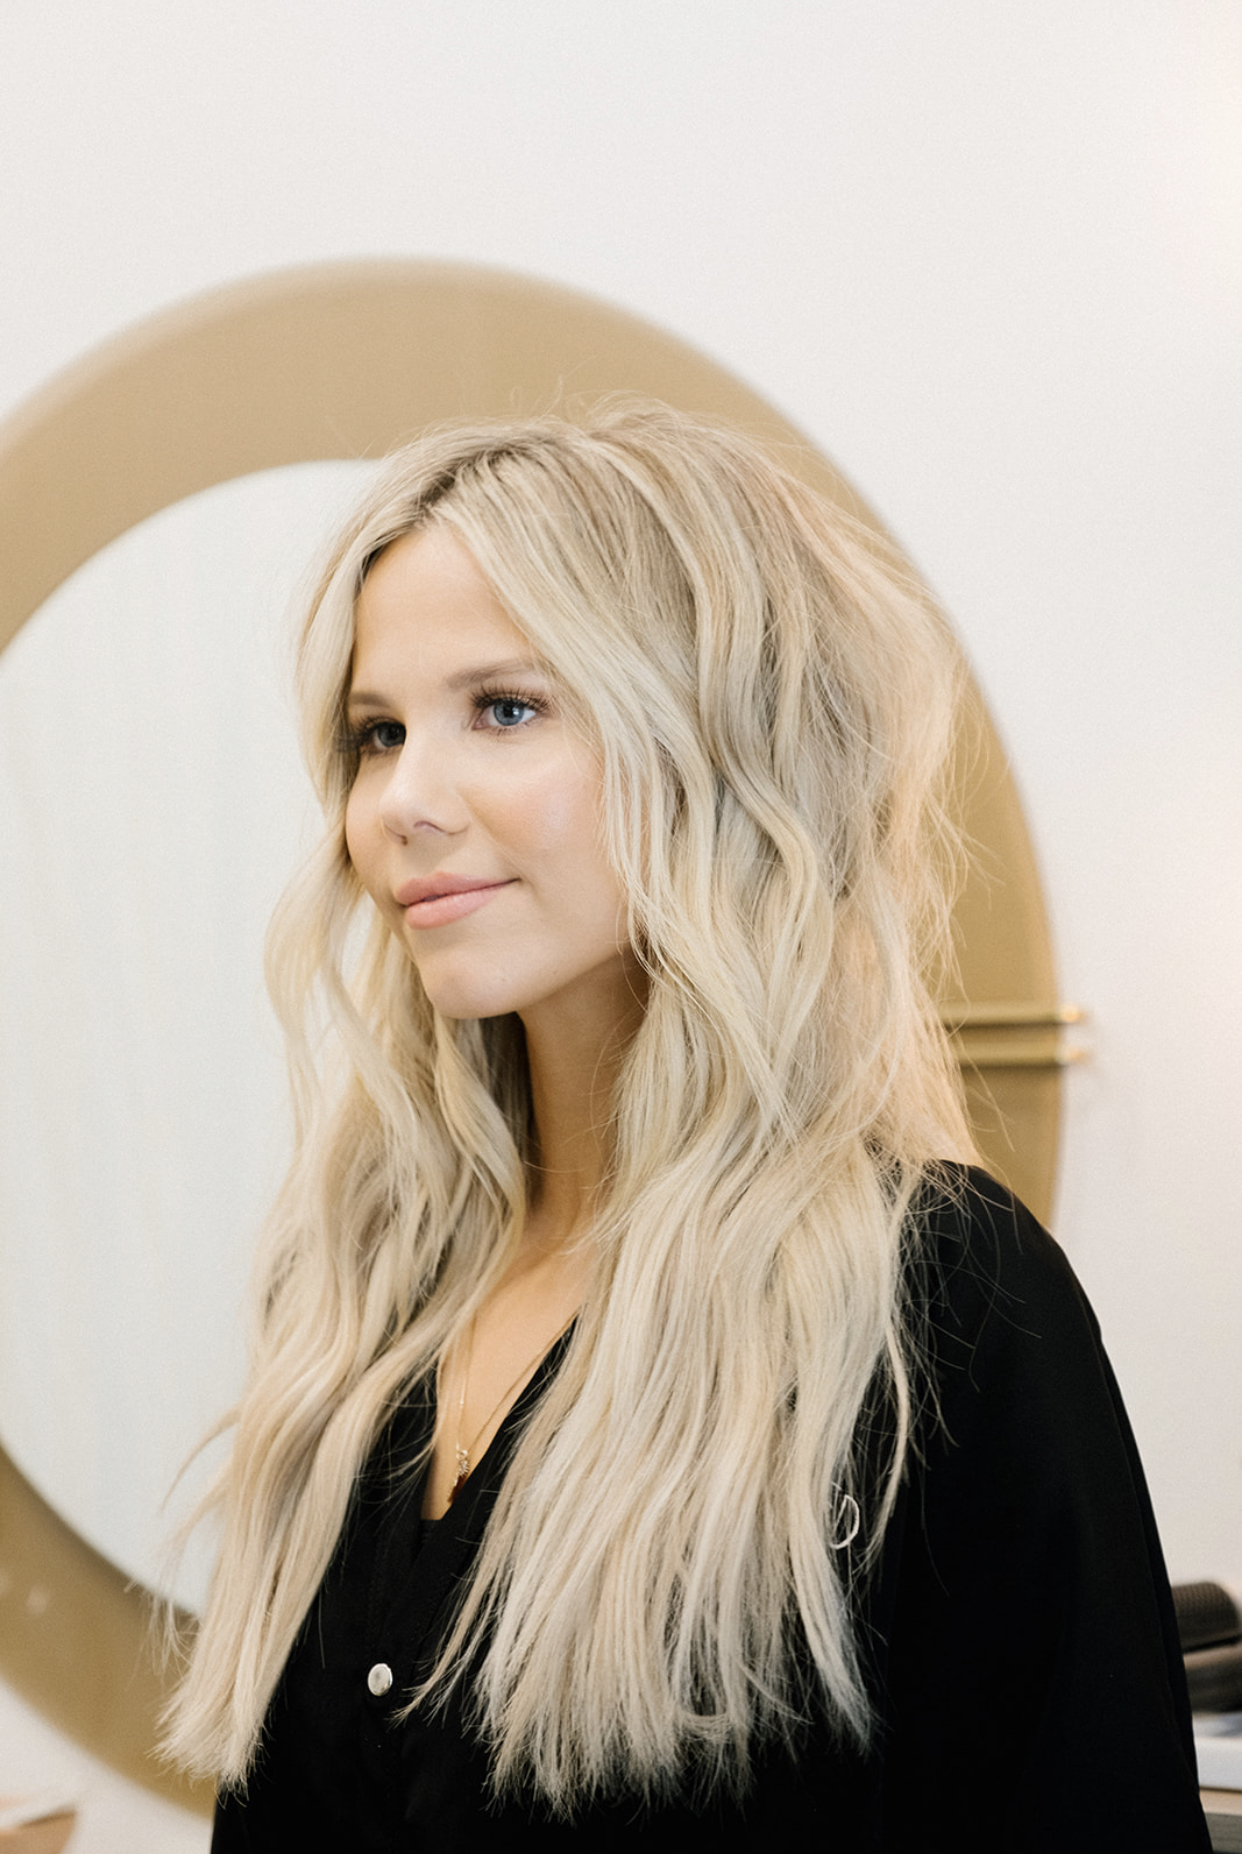 Deciding to get long blonde hand tied hair extensions? See the hair extensions before and after from a Florida hair stylist! #hairextensions #handtiedextensions #blondehair